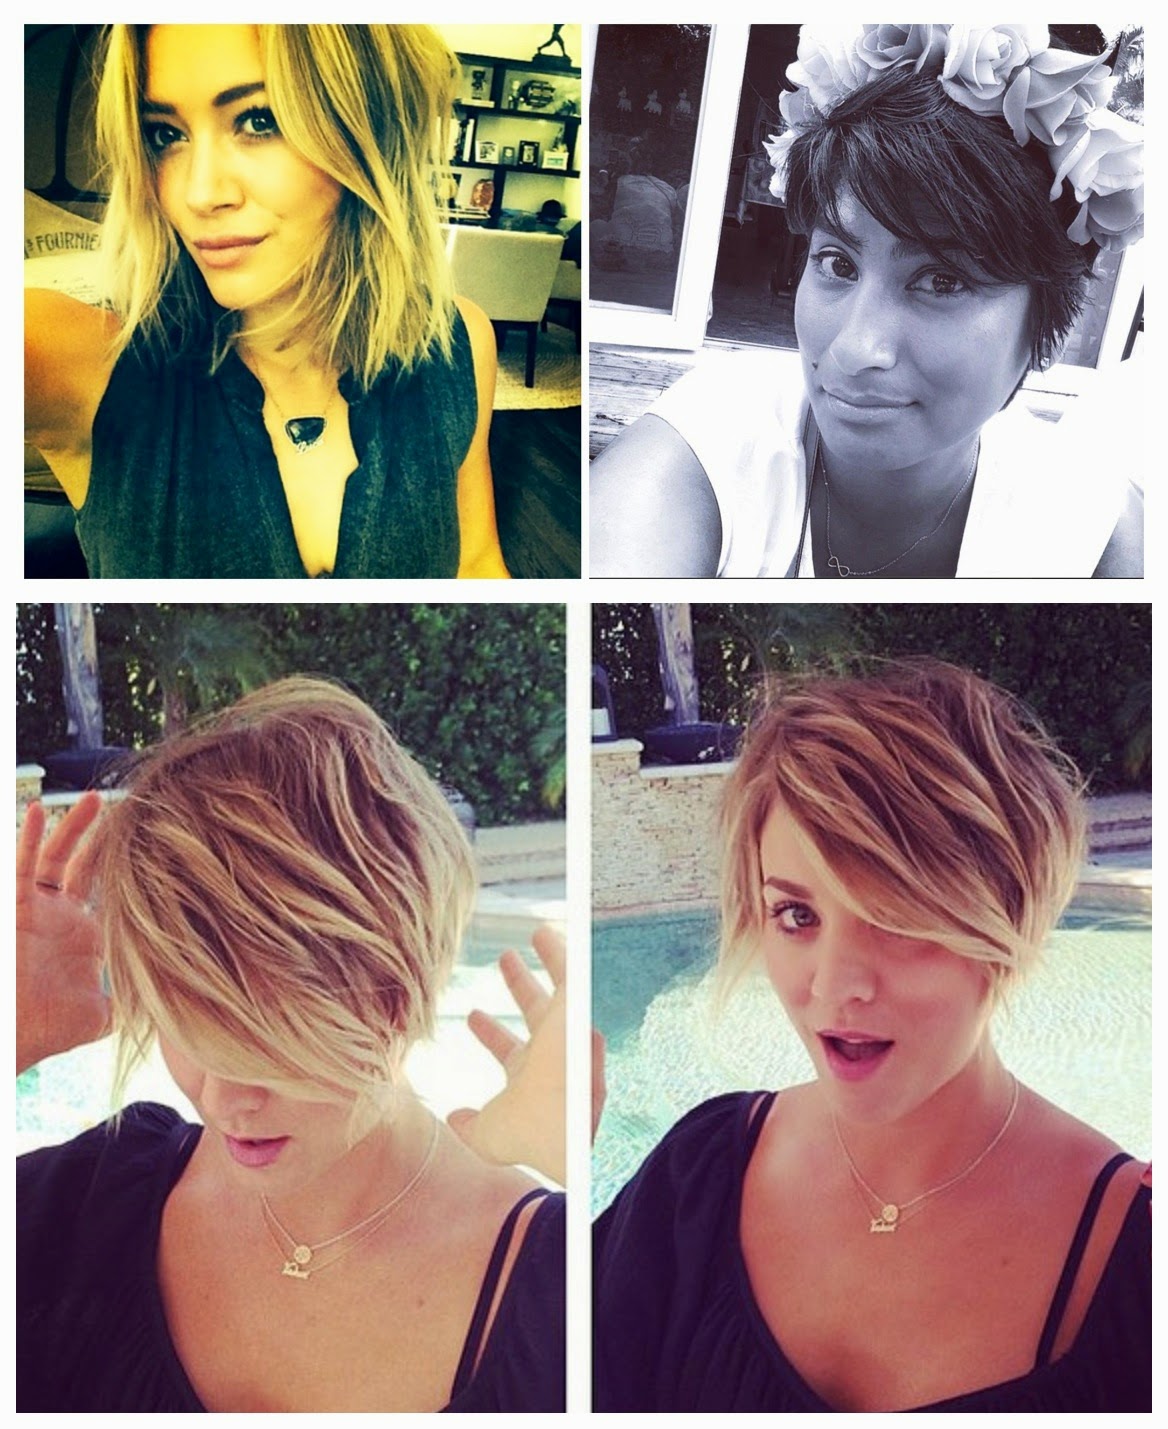 Short Hair Don't Care, As Long As It's Healthy | Fab Girl Magazine